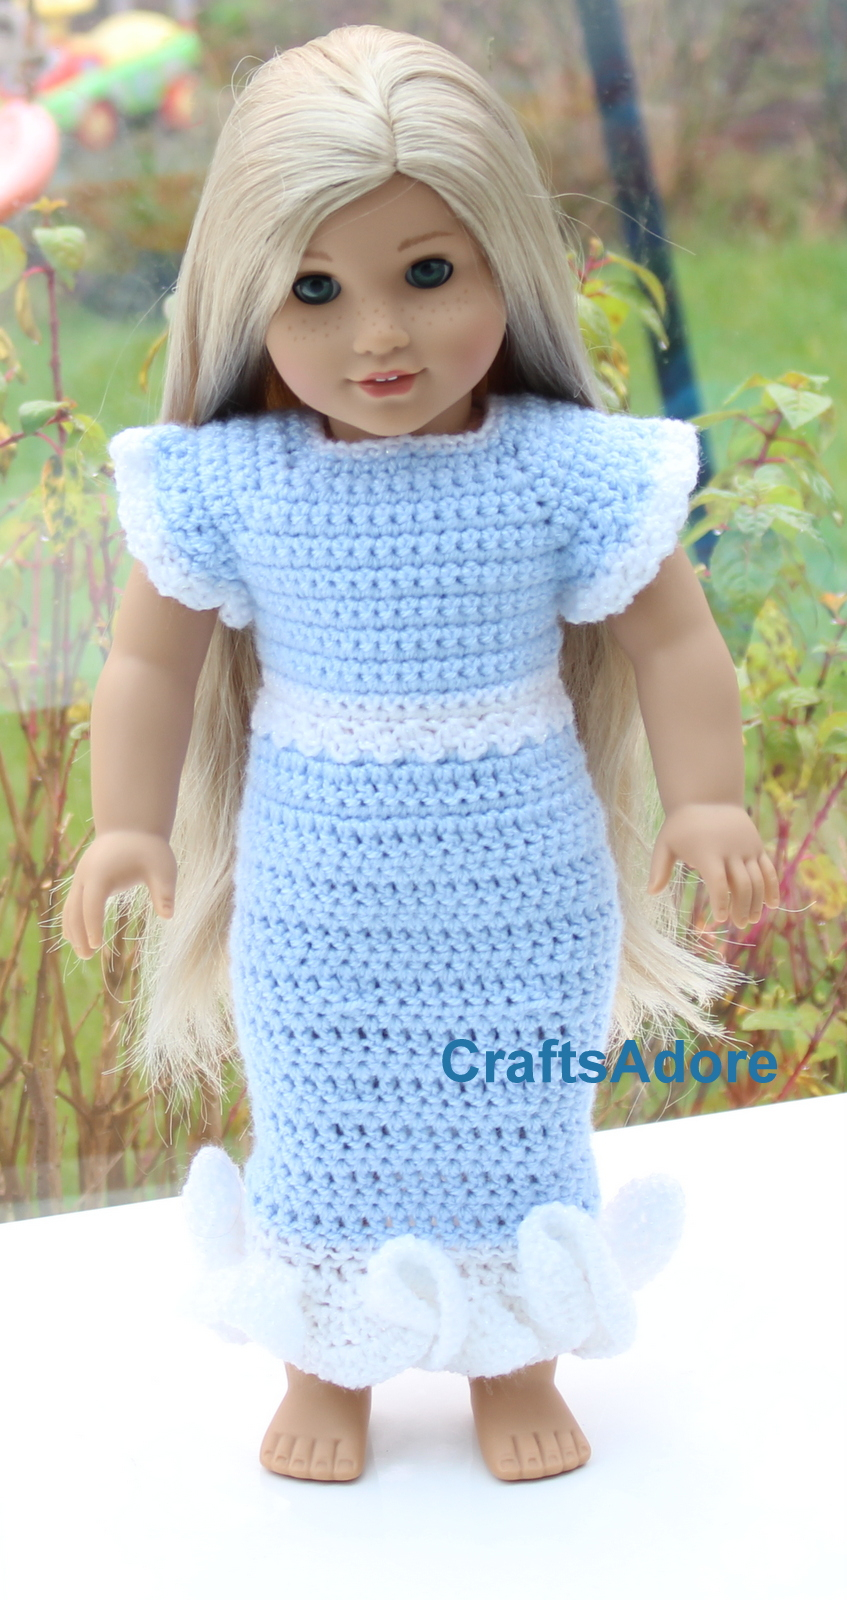 Free Crochet Patterns For American Girl Doll Craftsadores American Girl Dolls Channel